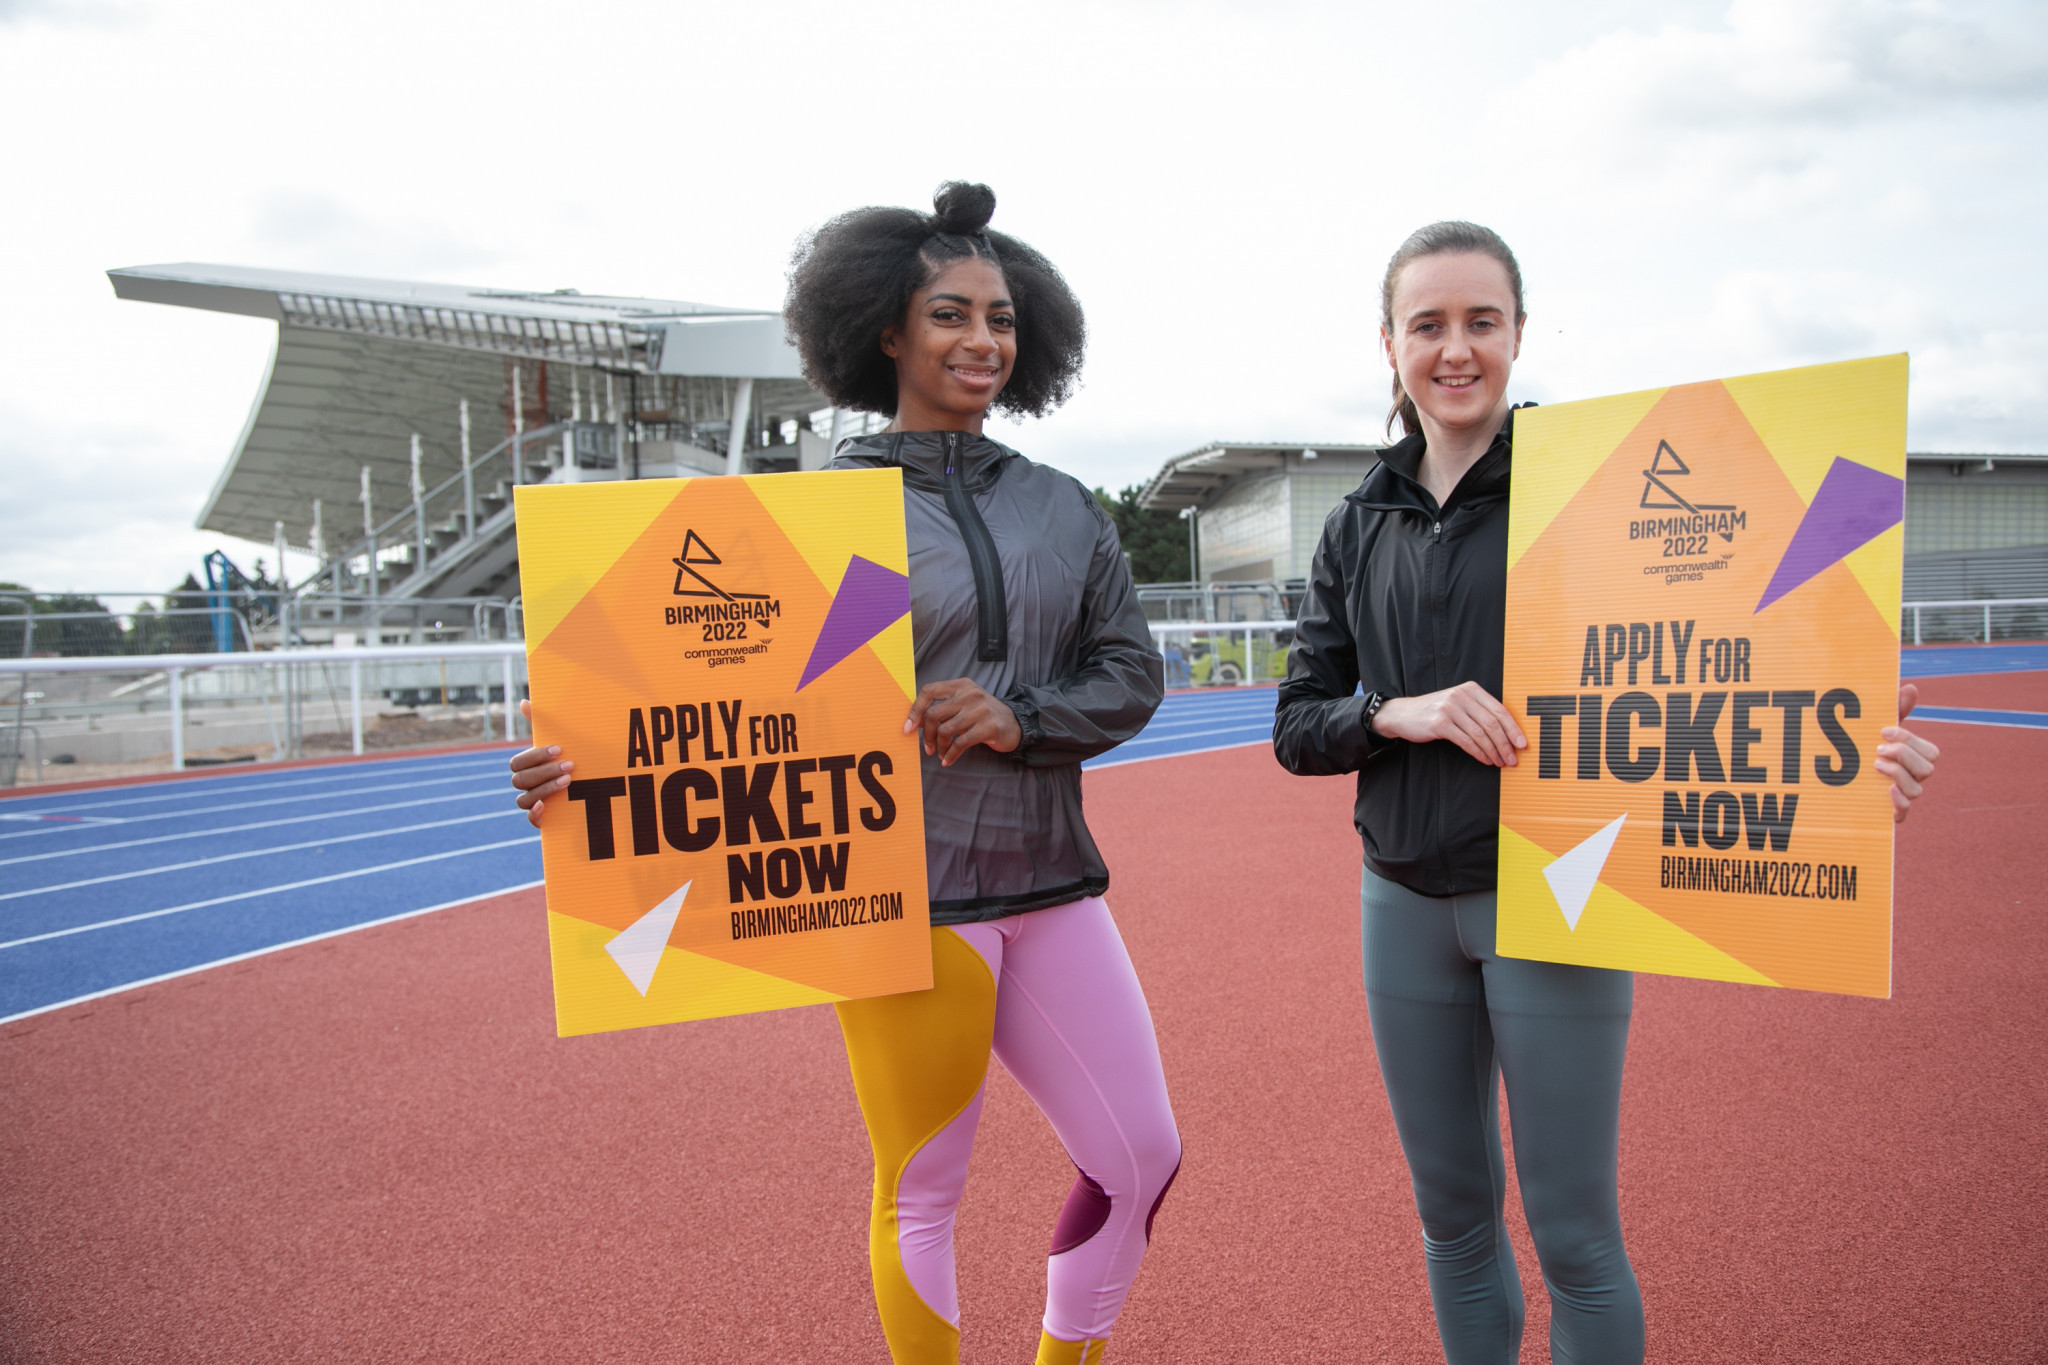 Tickets are now on sale for the Birmingham 2022 Commonwealth Games, scheduled to take place from July 28 to August 8 2022 ©Birmingham 2022